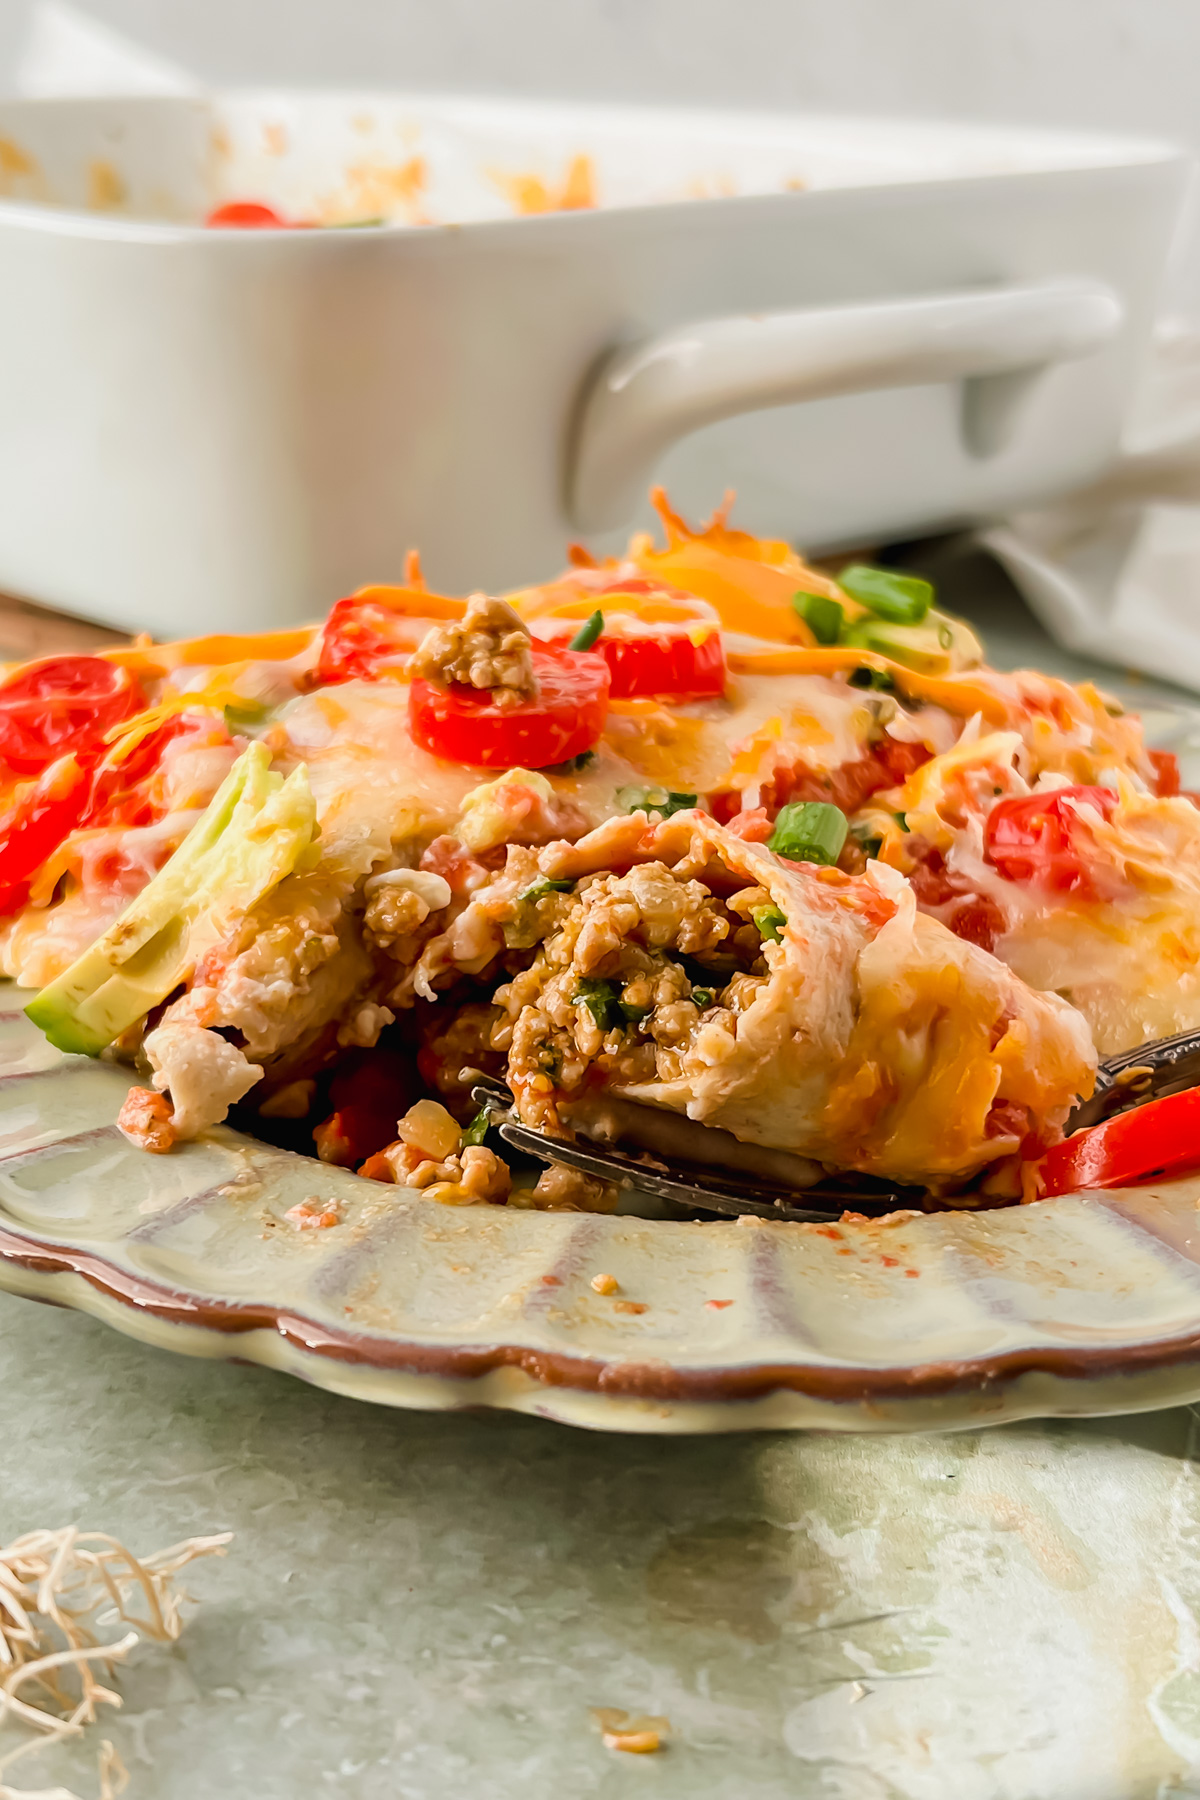 baked healthy ground turkey enchiladas garnished with cherry tomato slices, avocado slices, green onion on gray serving plate with pan of additional enchiladas in background.